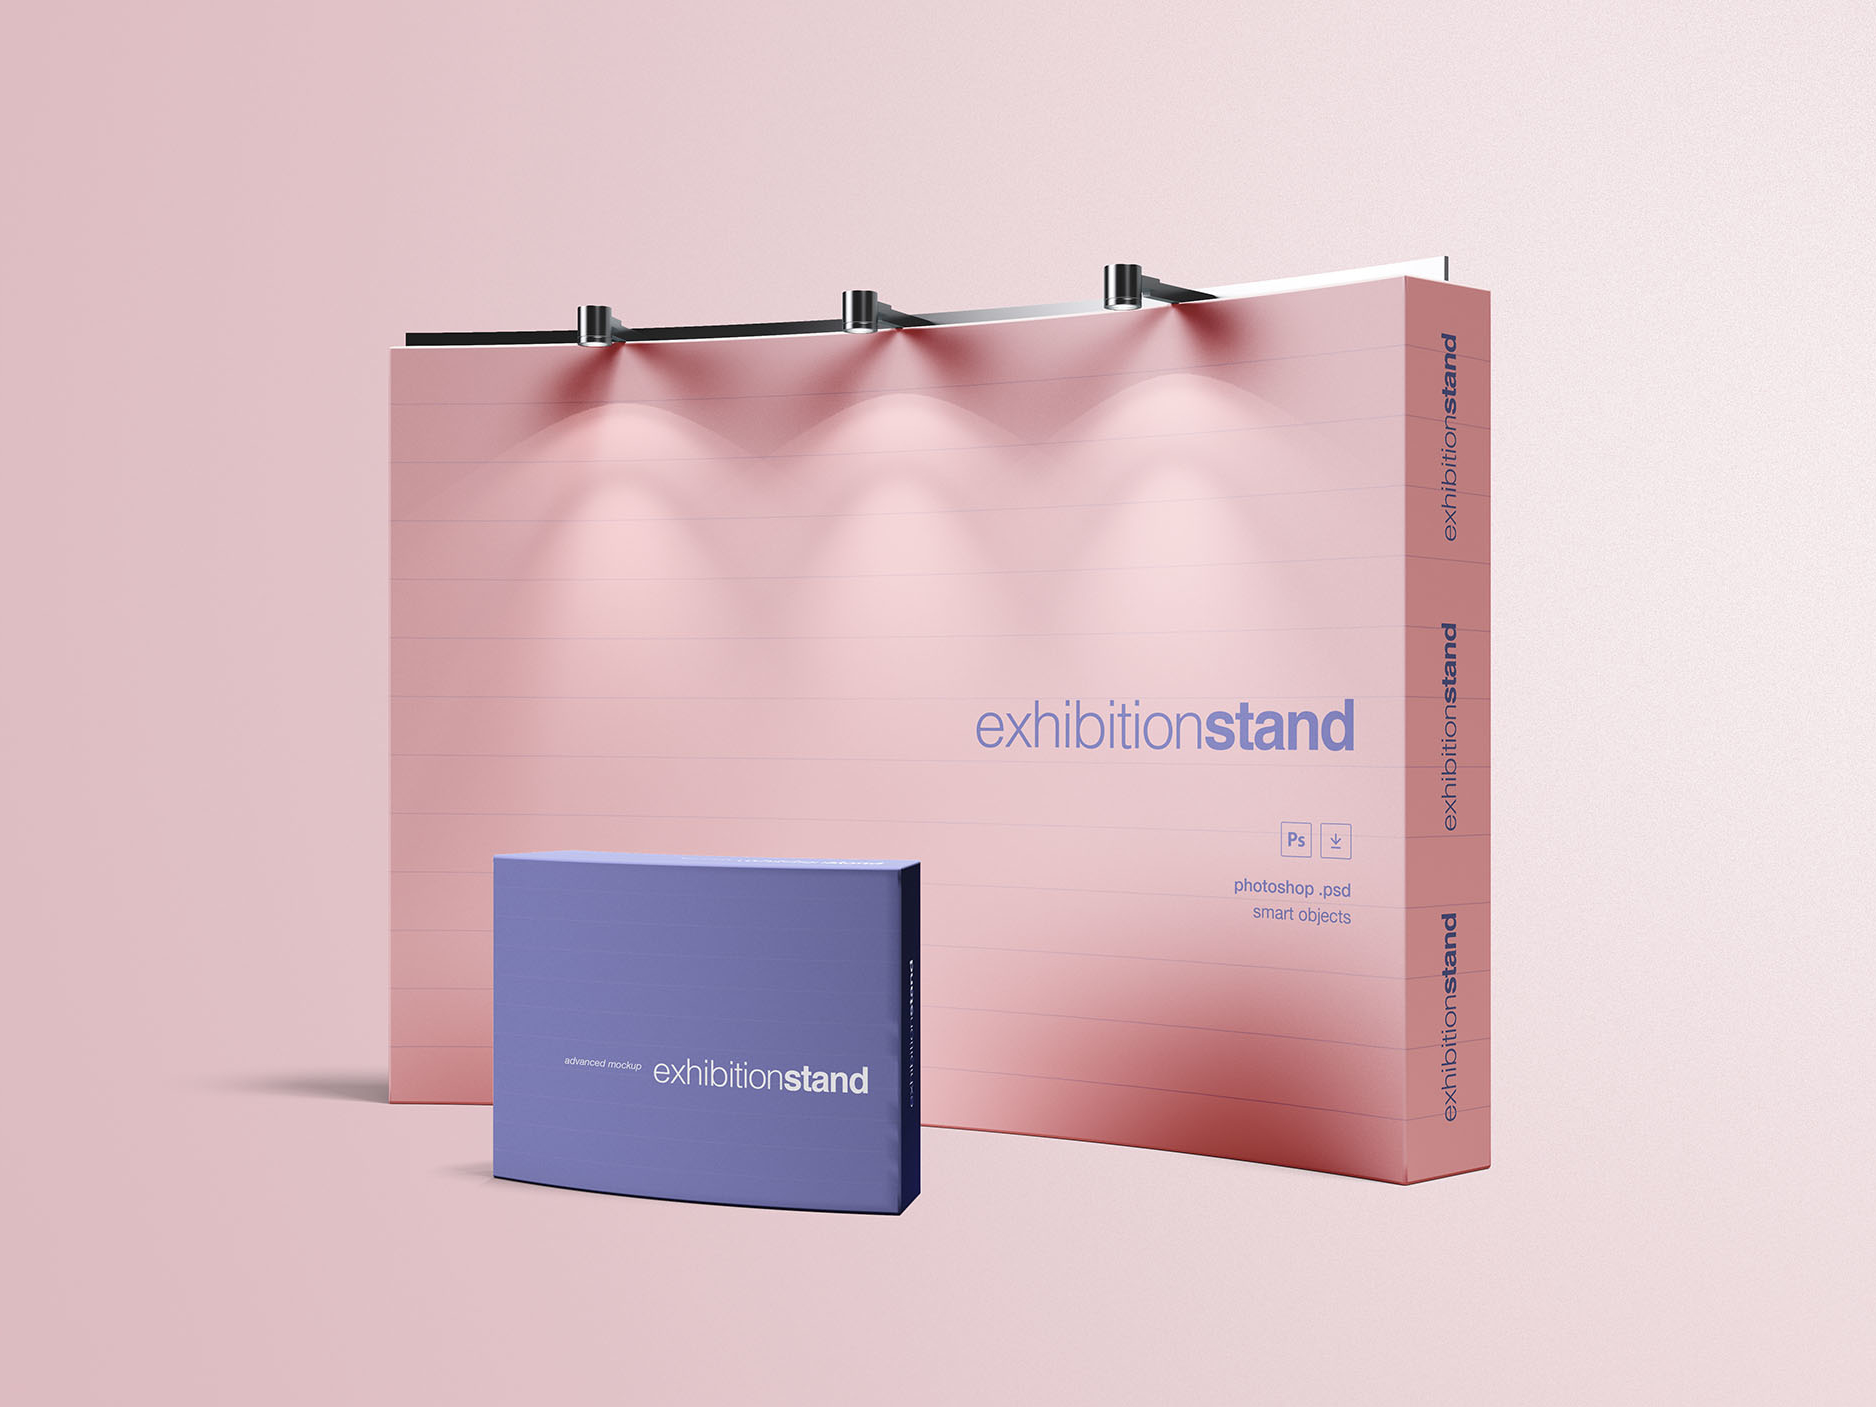 Download Free Exhibition Stand Mockup by Wassim | Dribbble | Dribbble